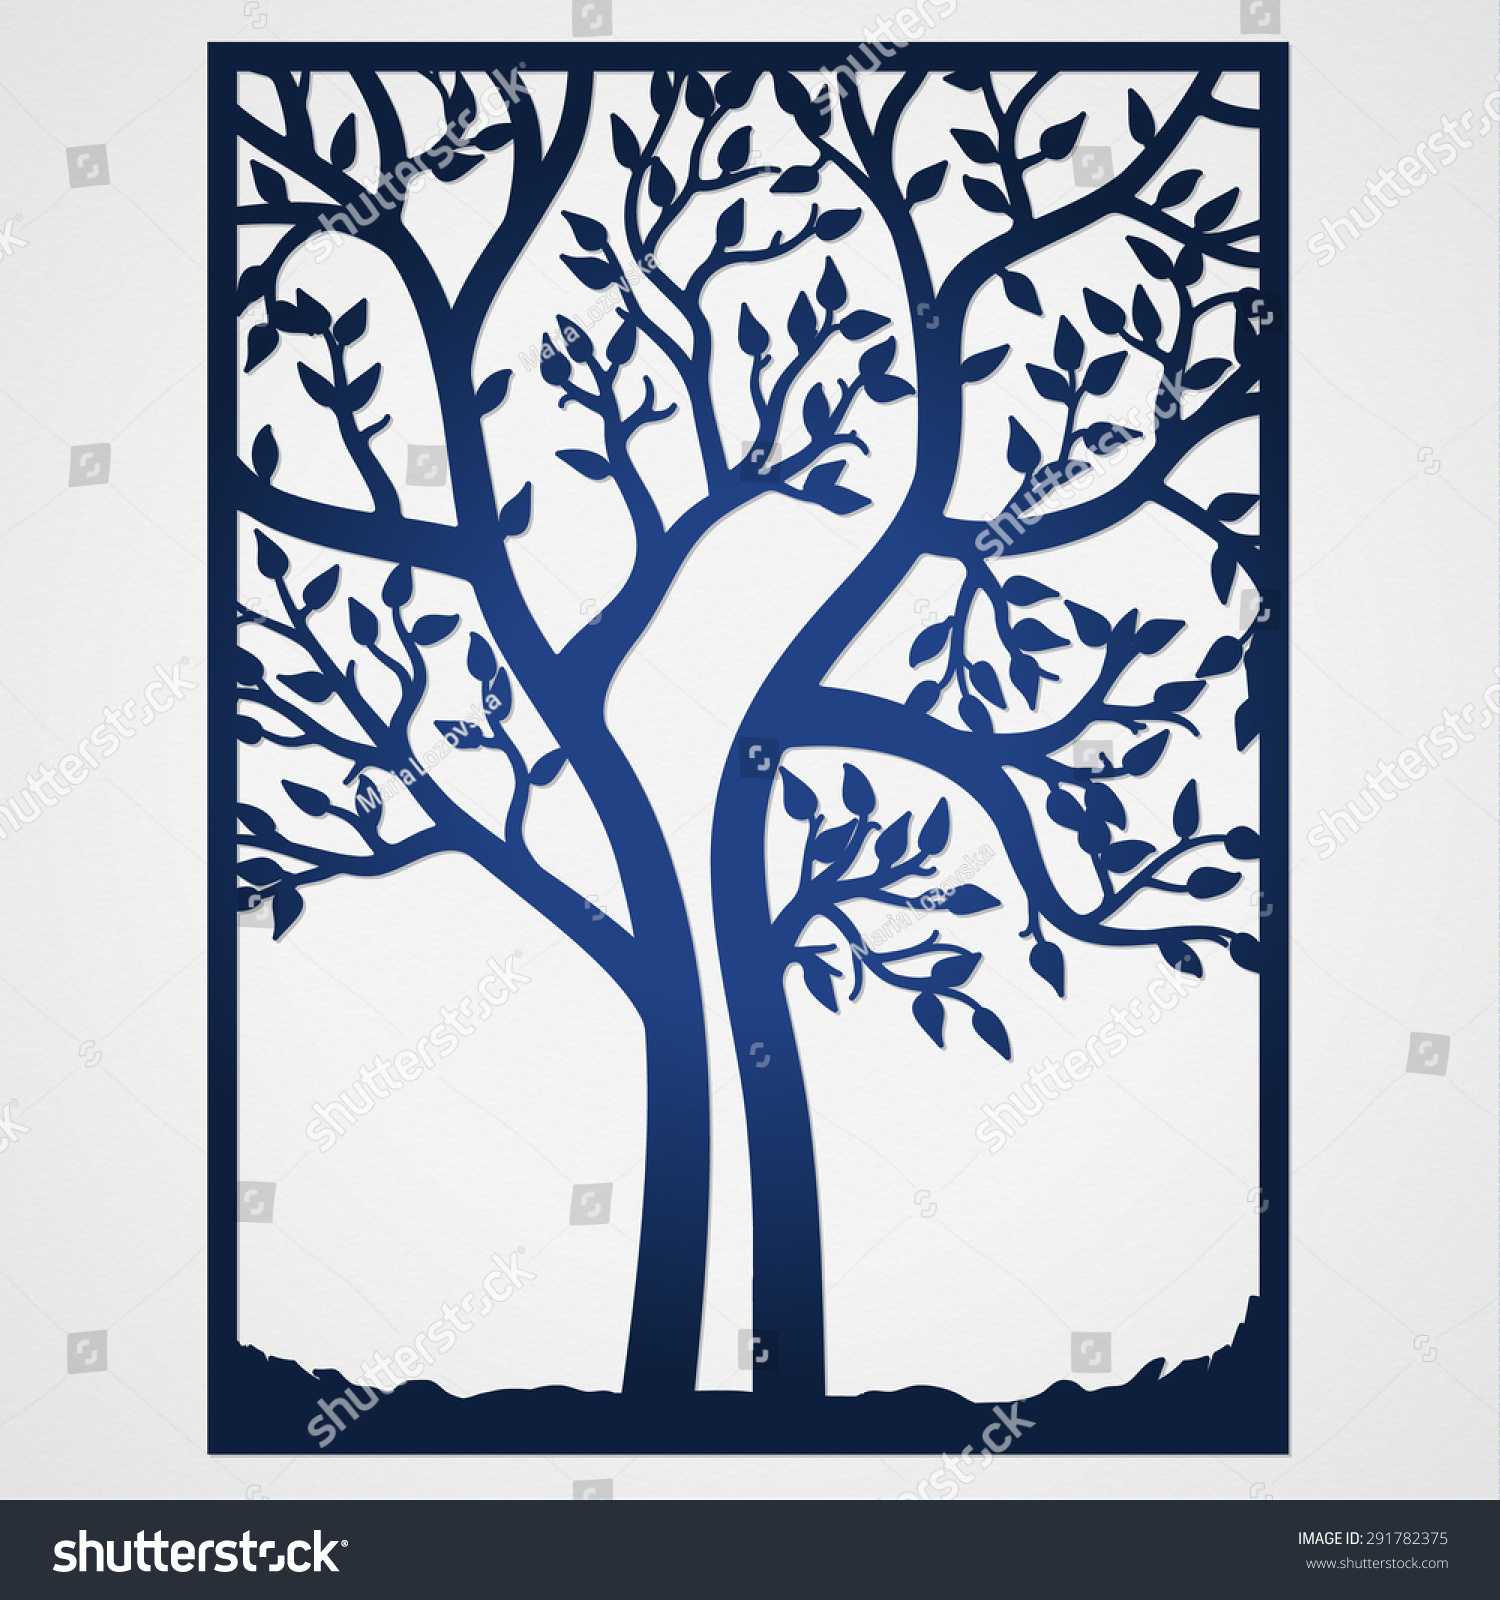 Abstract Frame Tree May Be Used Stock Image | Download Now In Silhouette Cameo Card Templates